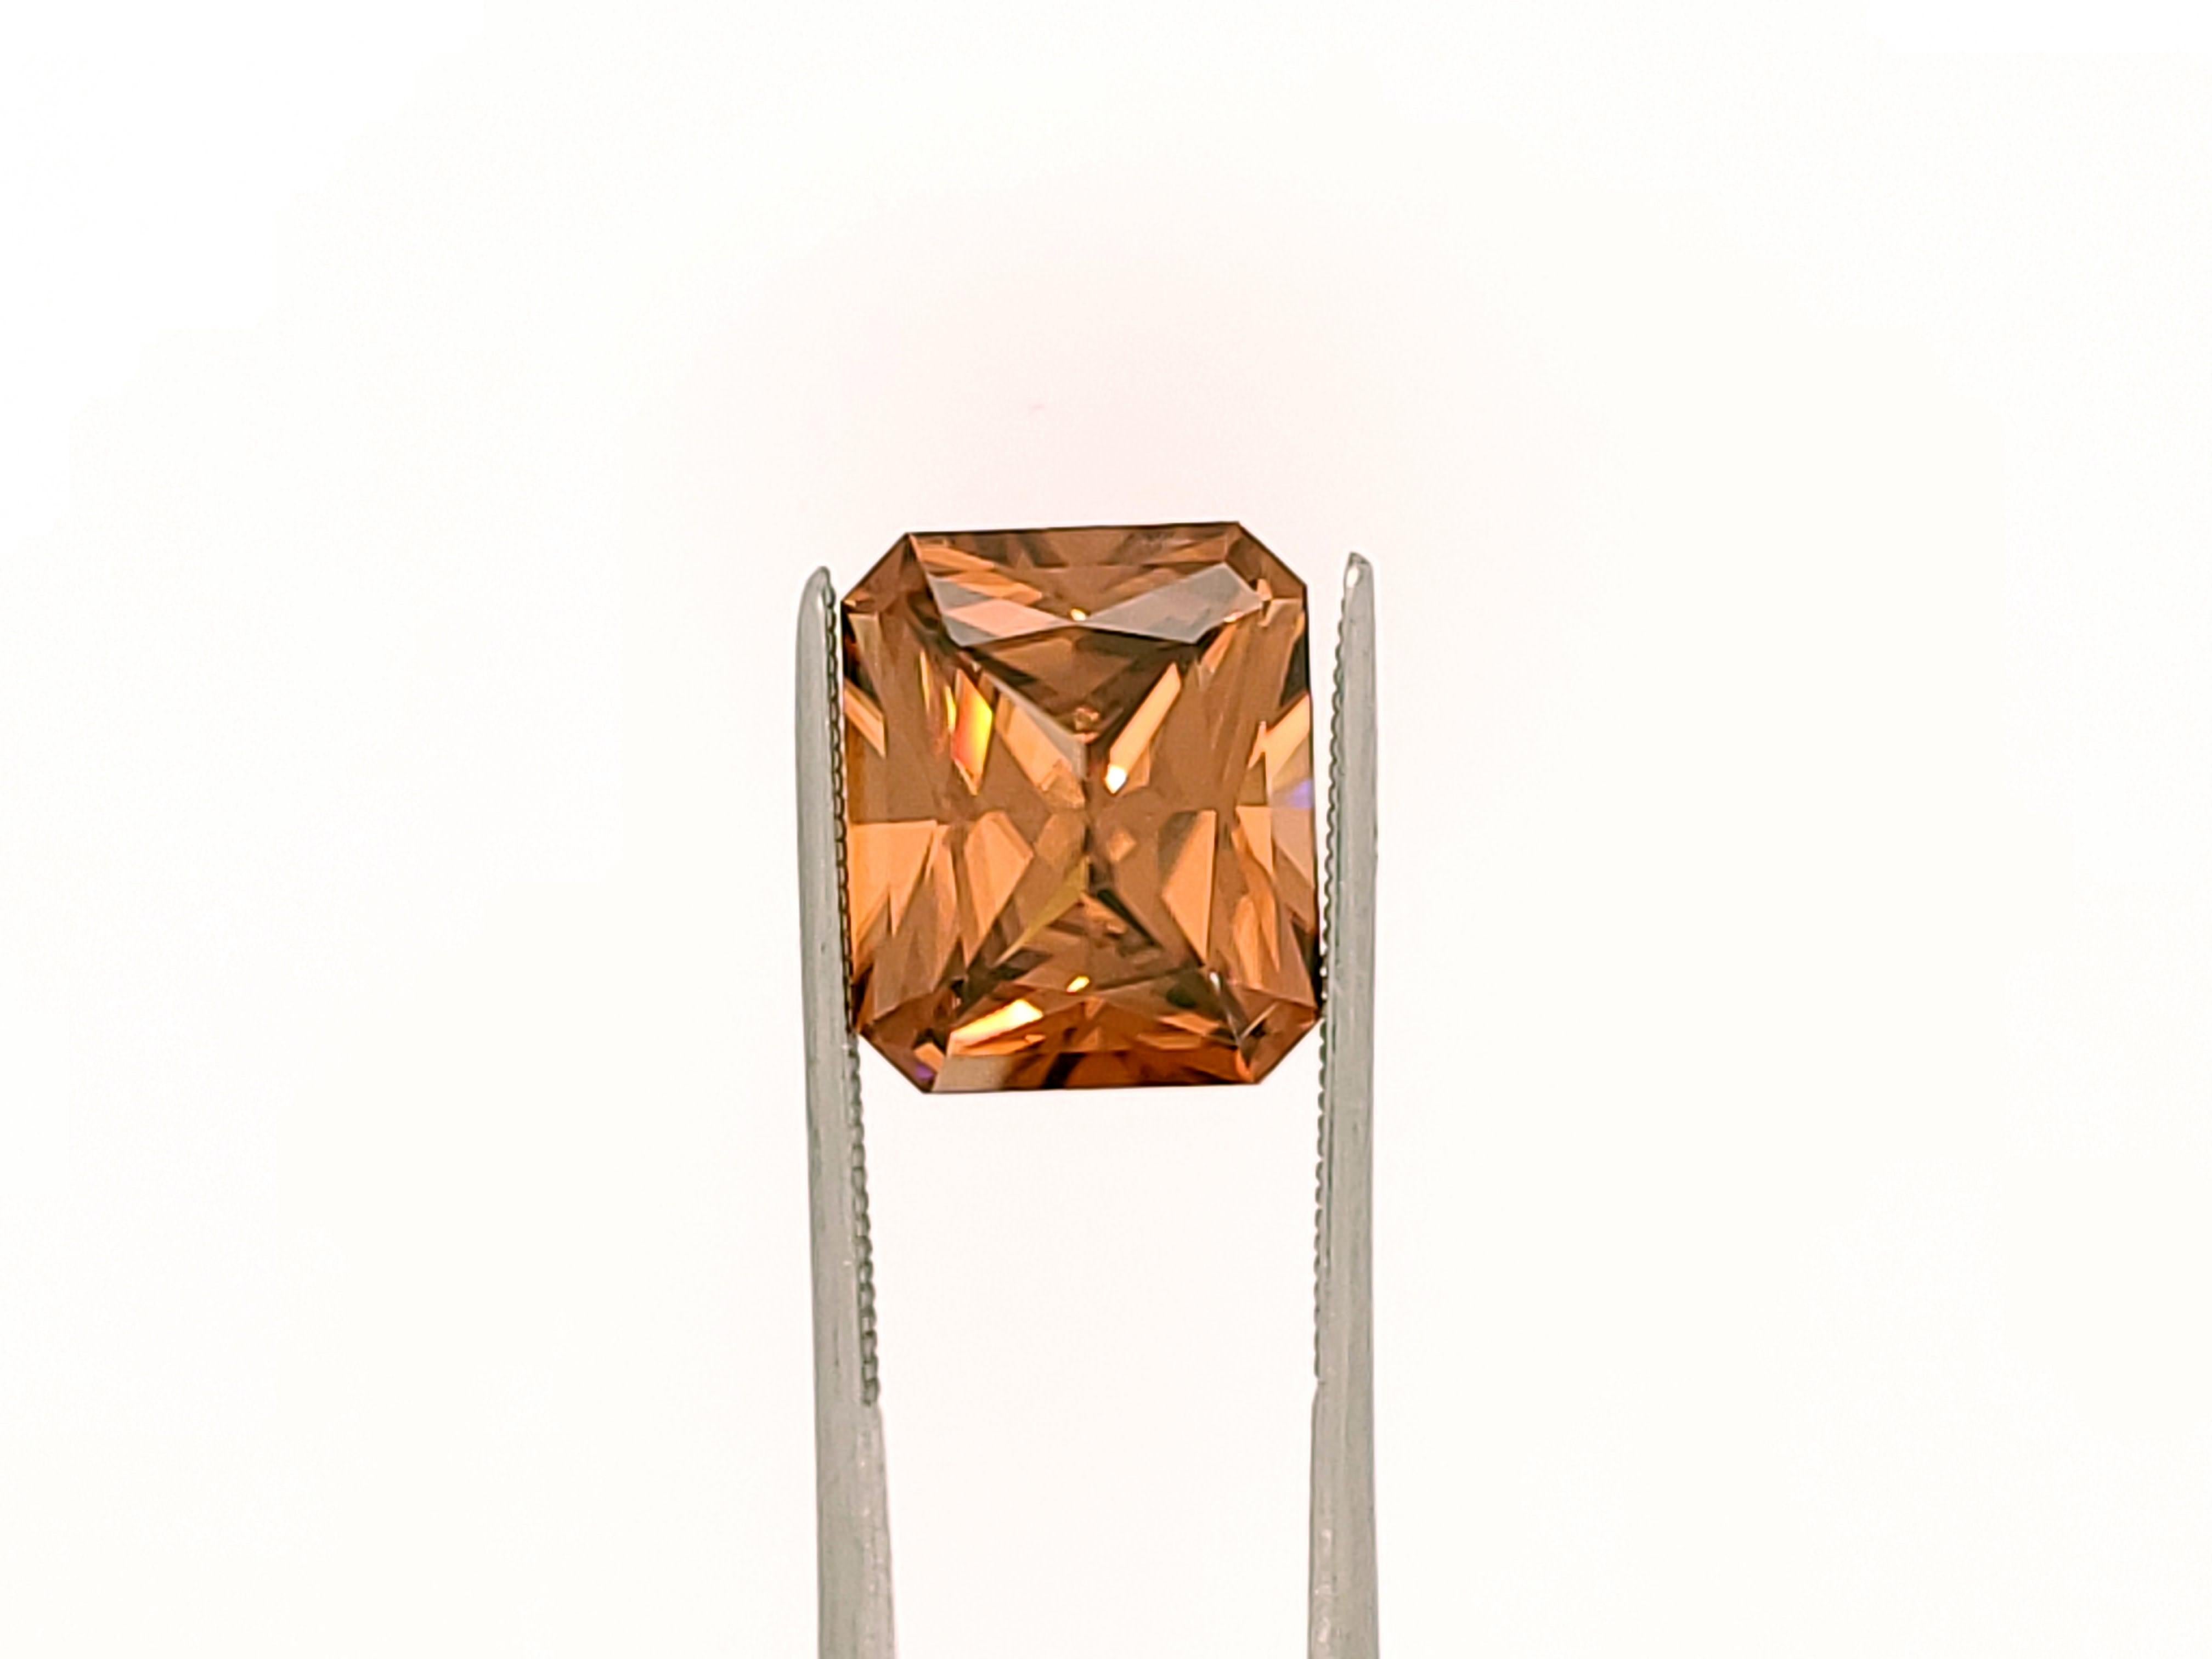 This 8.71 carat Orange Zircon was faceted from our rough by a cutter we use who is located in the United States.  It measures approx 12x10mm. Photo was modified a bit to tone down the orange as the camera photographed a much more intense Orange.